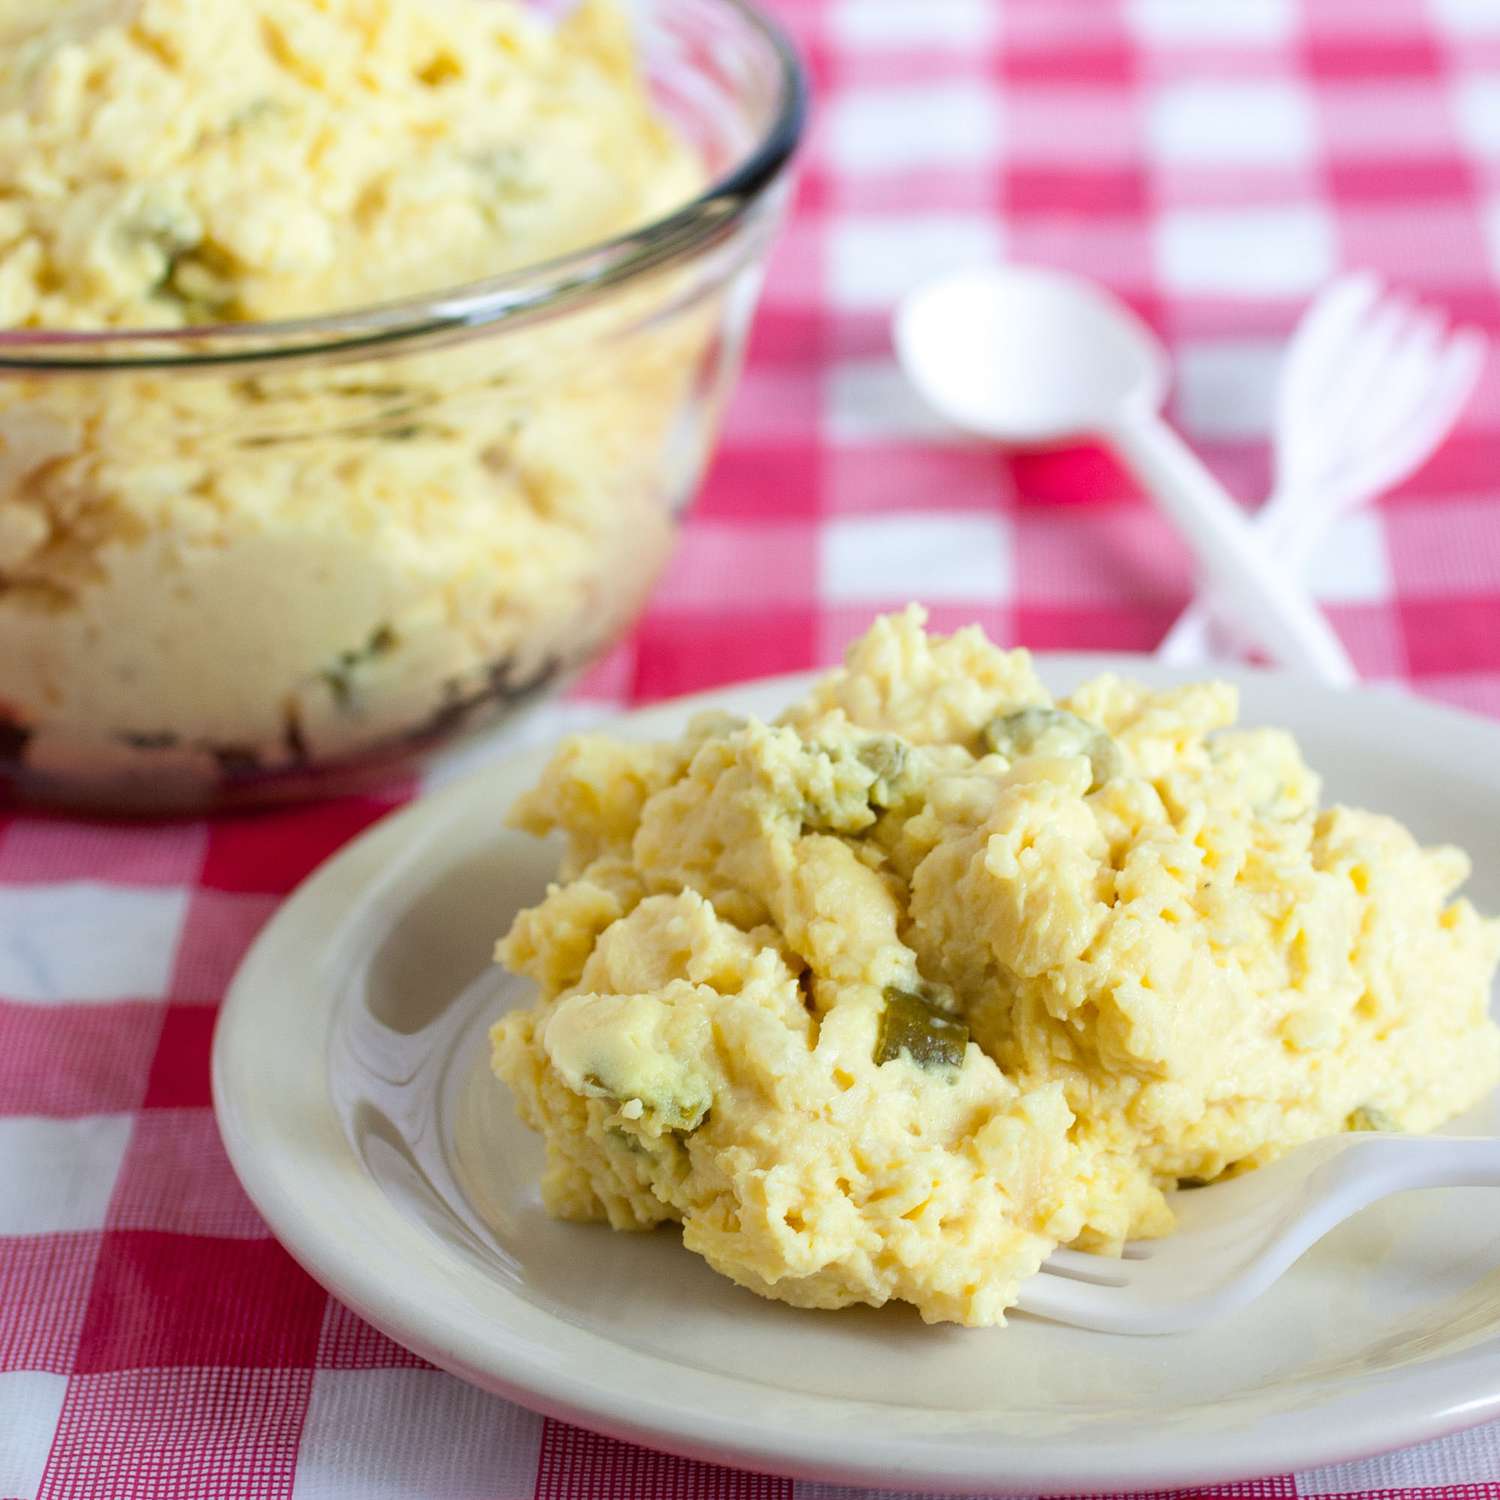 How Long Can You Actually Leave Potato Salad Out?